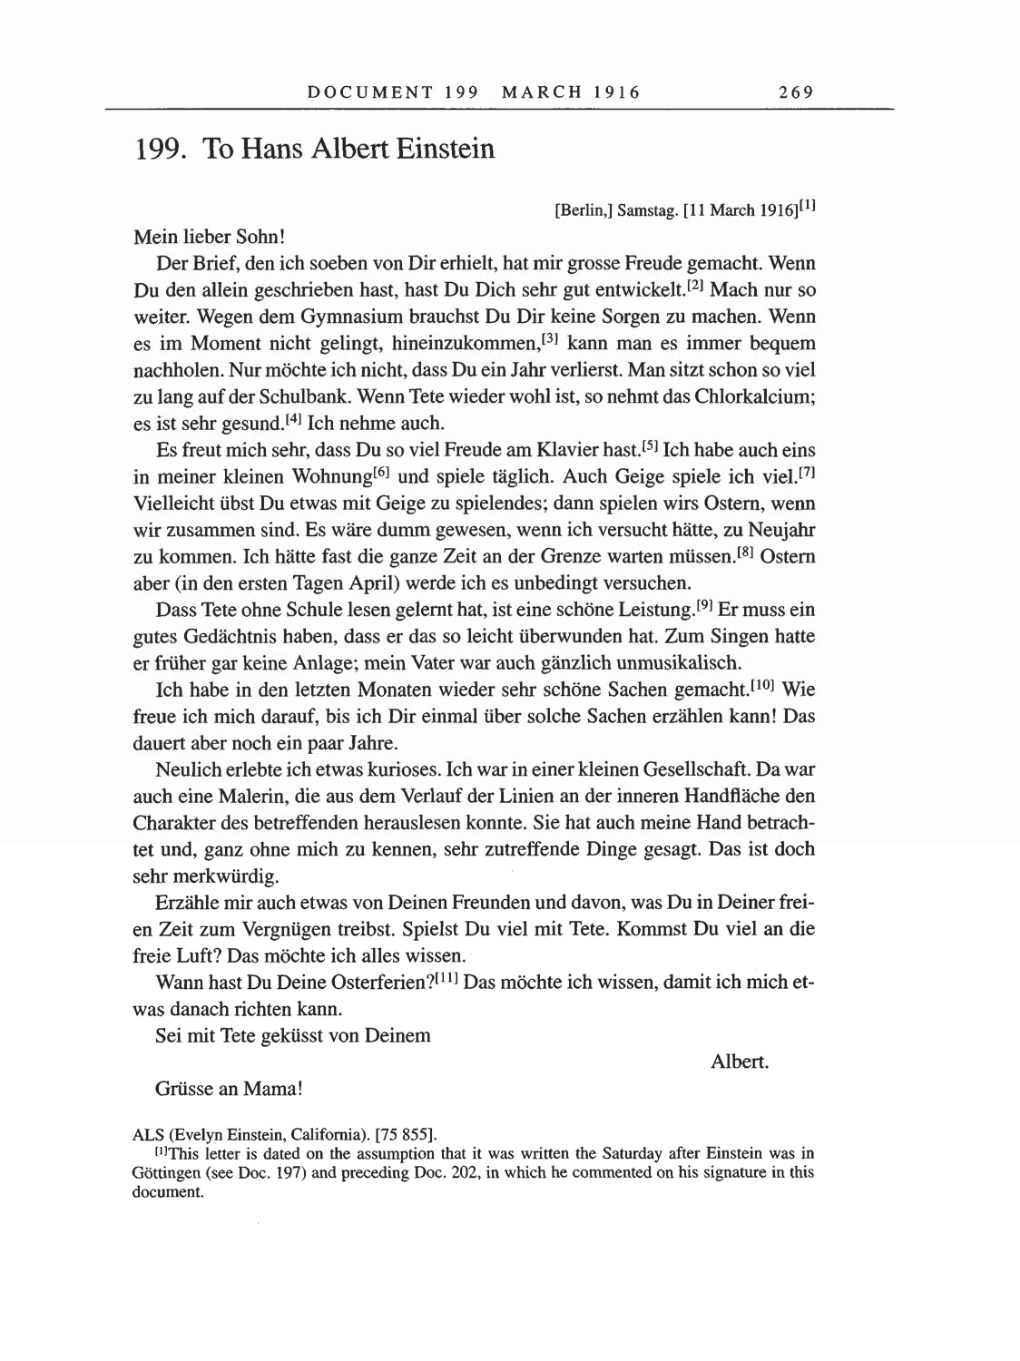 Volume 8, Part A: The Berlin Years: Correspondence 1914-1917 page 269